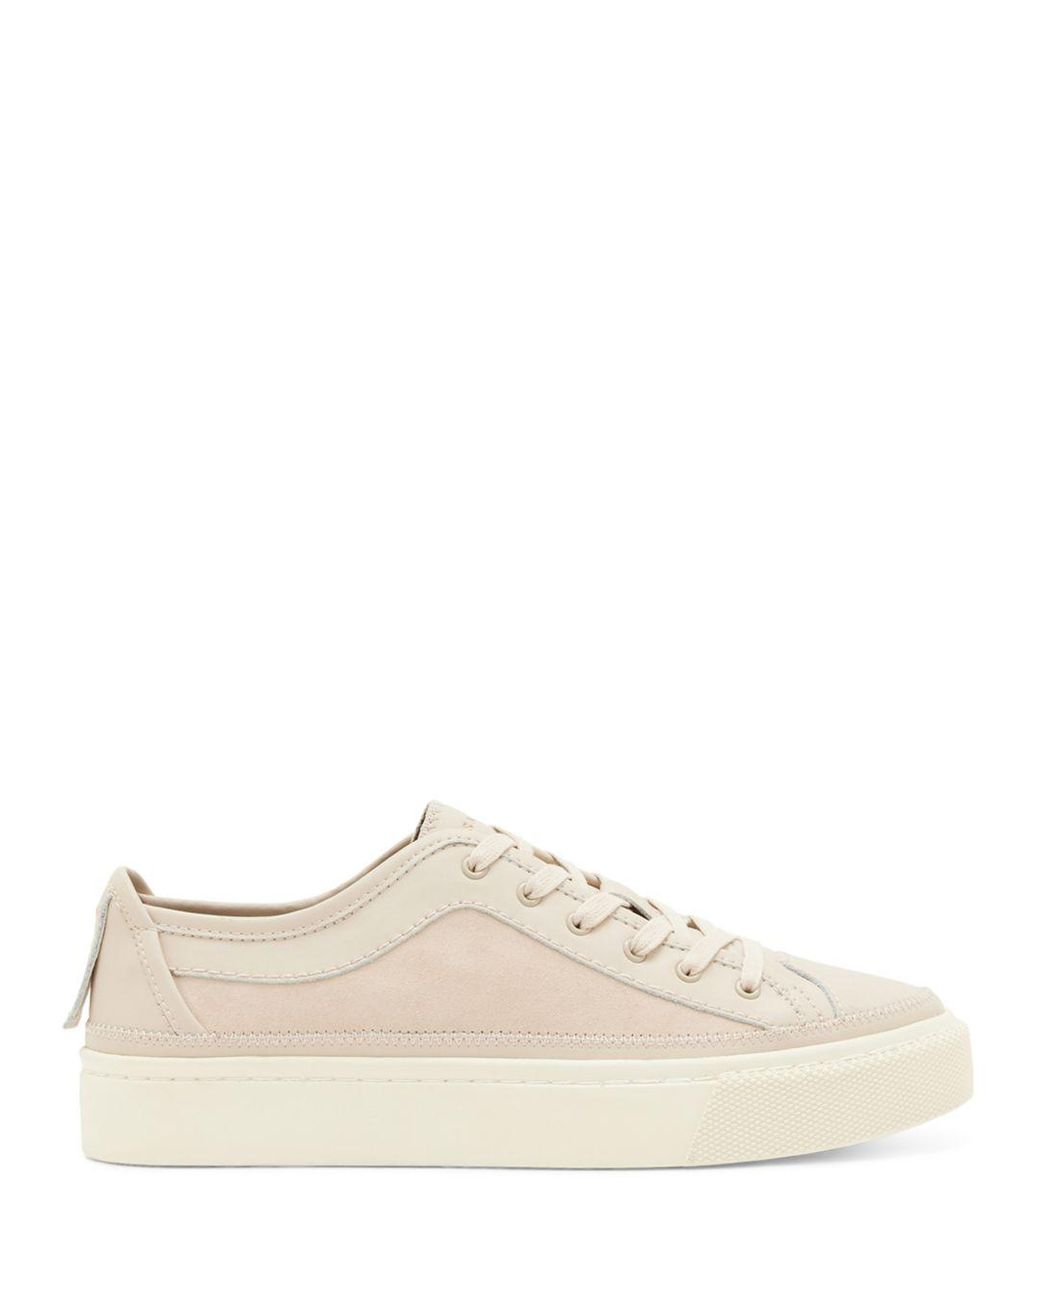 AllSaints Milla Lace Up Low Top Sneakers in Natural | Lyst